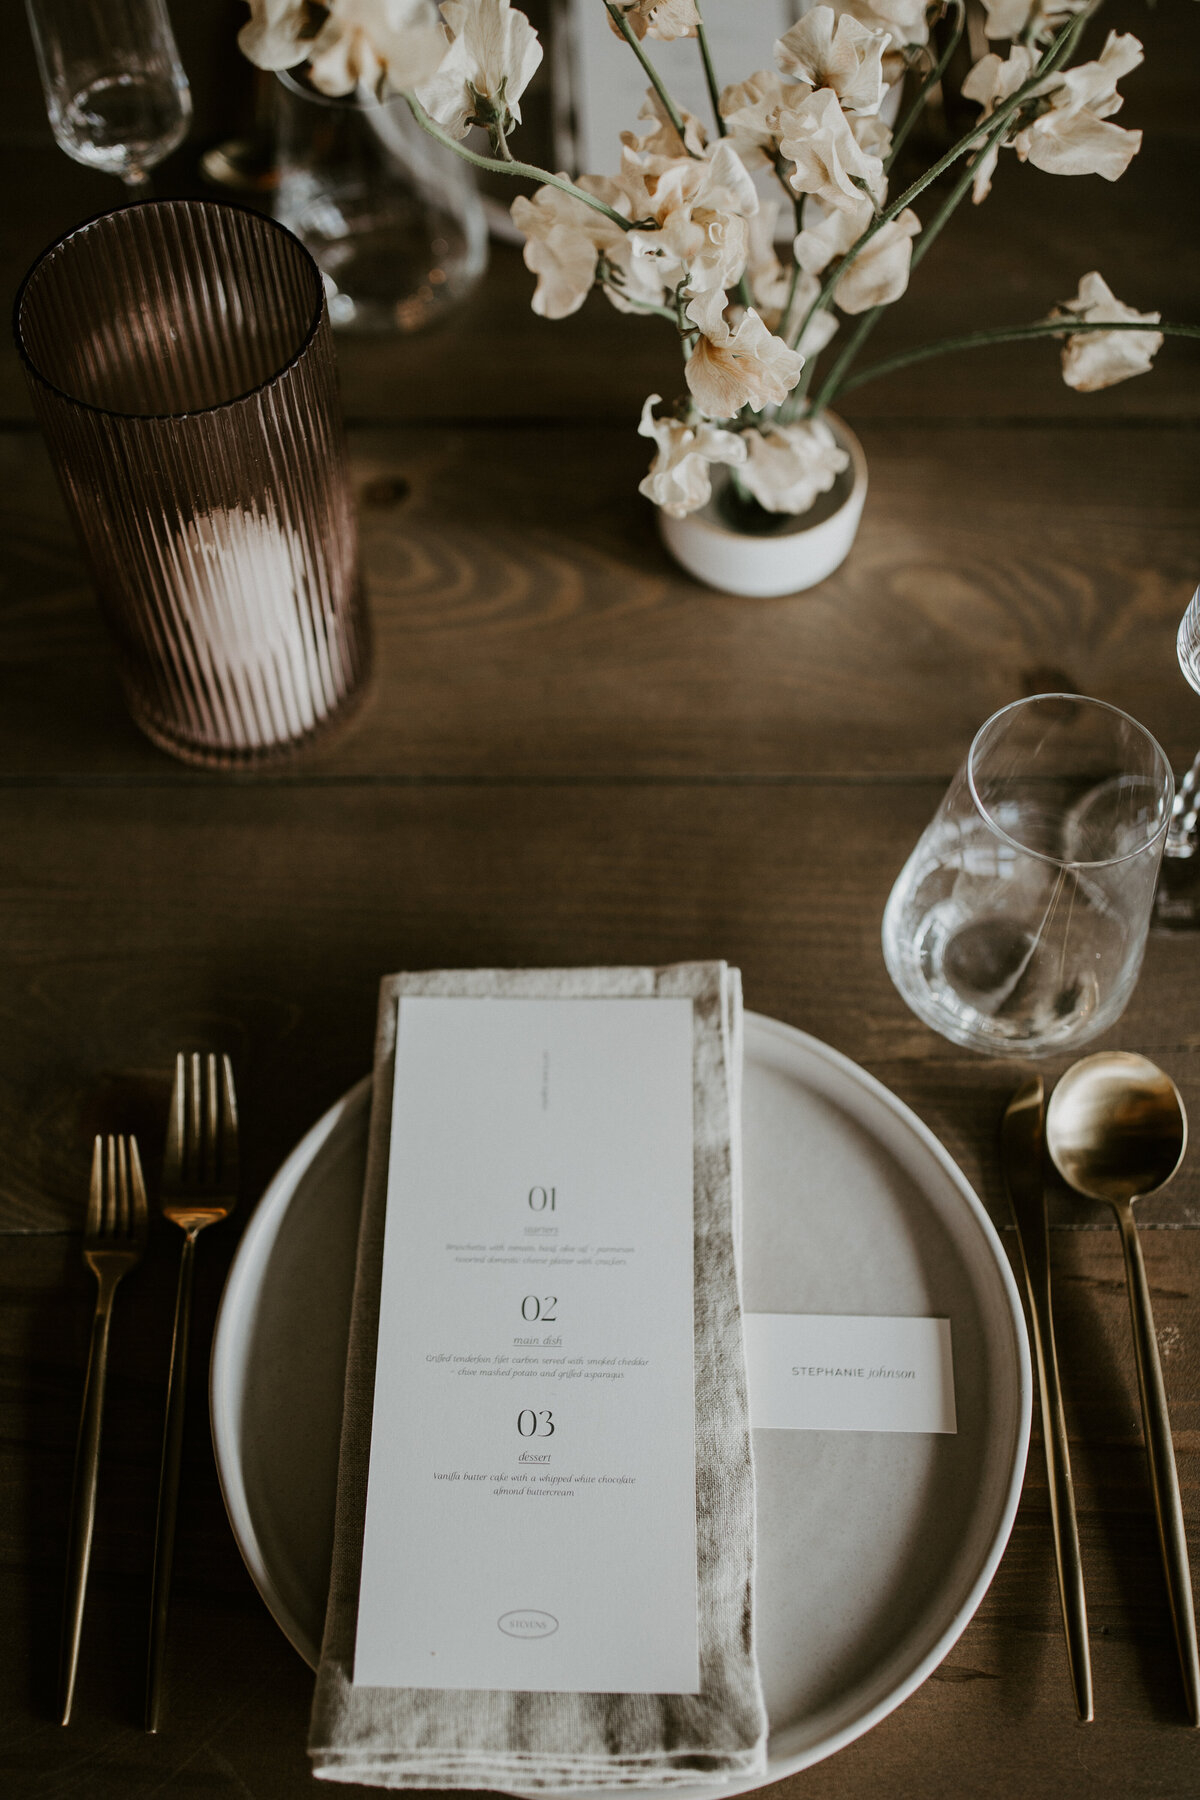 White dinner menu with black font atop a white linen napkin and white plate set on wooden table with gold silverware.